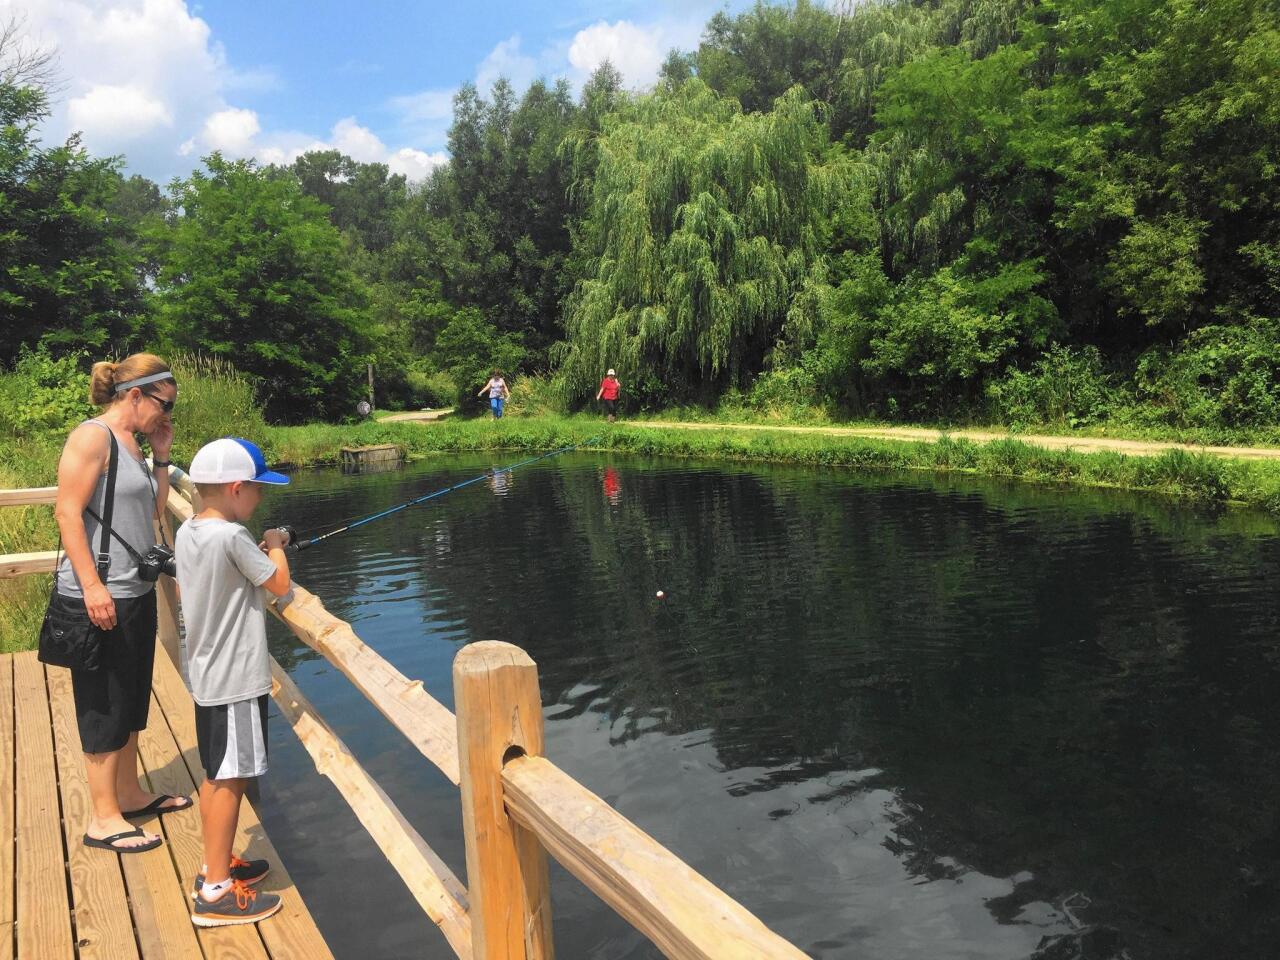 People can fish year-round at the public trout pond at Rushing Waters Fisheries near Palmyra, Wis., about a two-hour drive from Chicago.